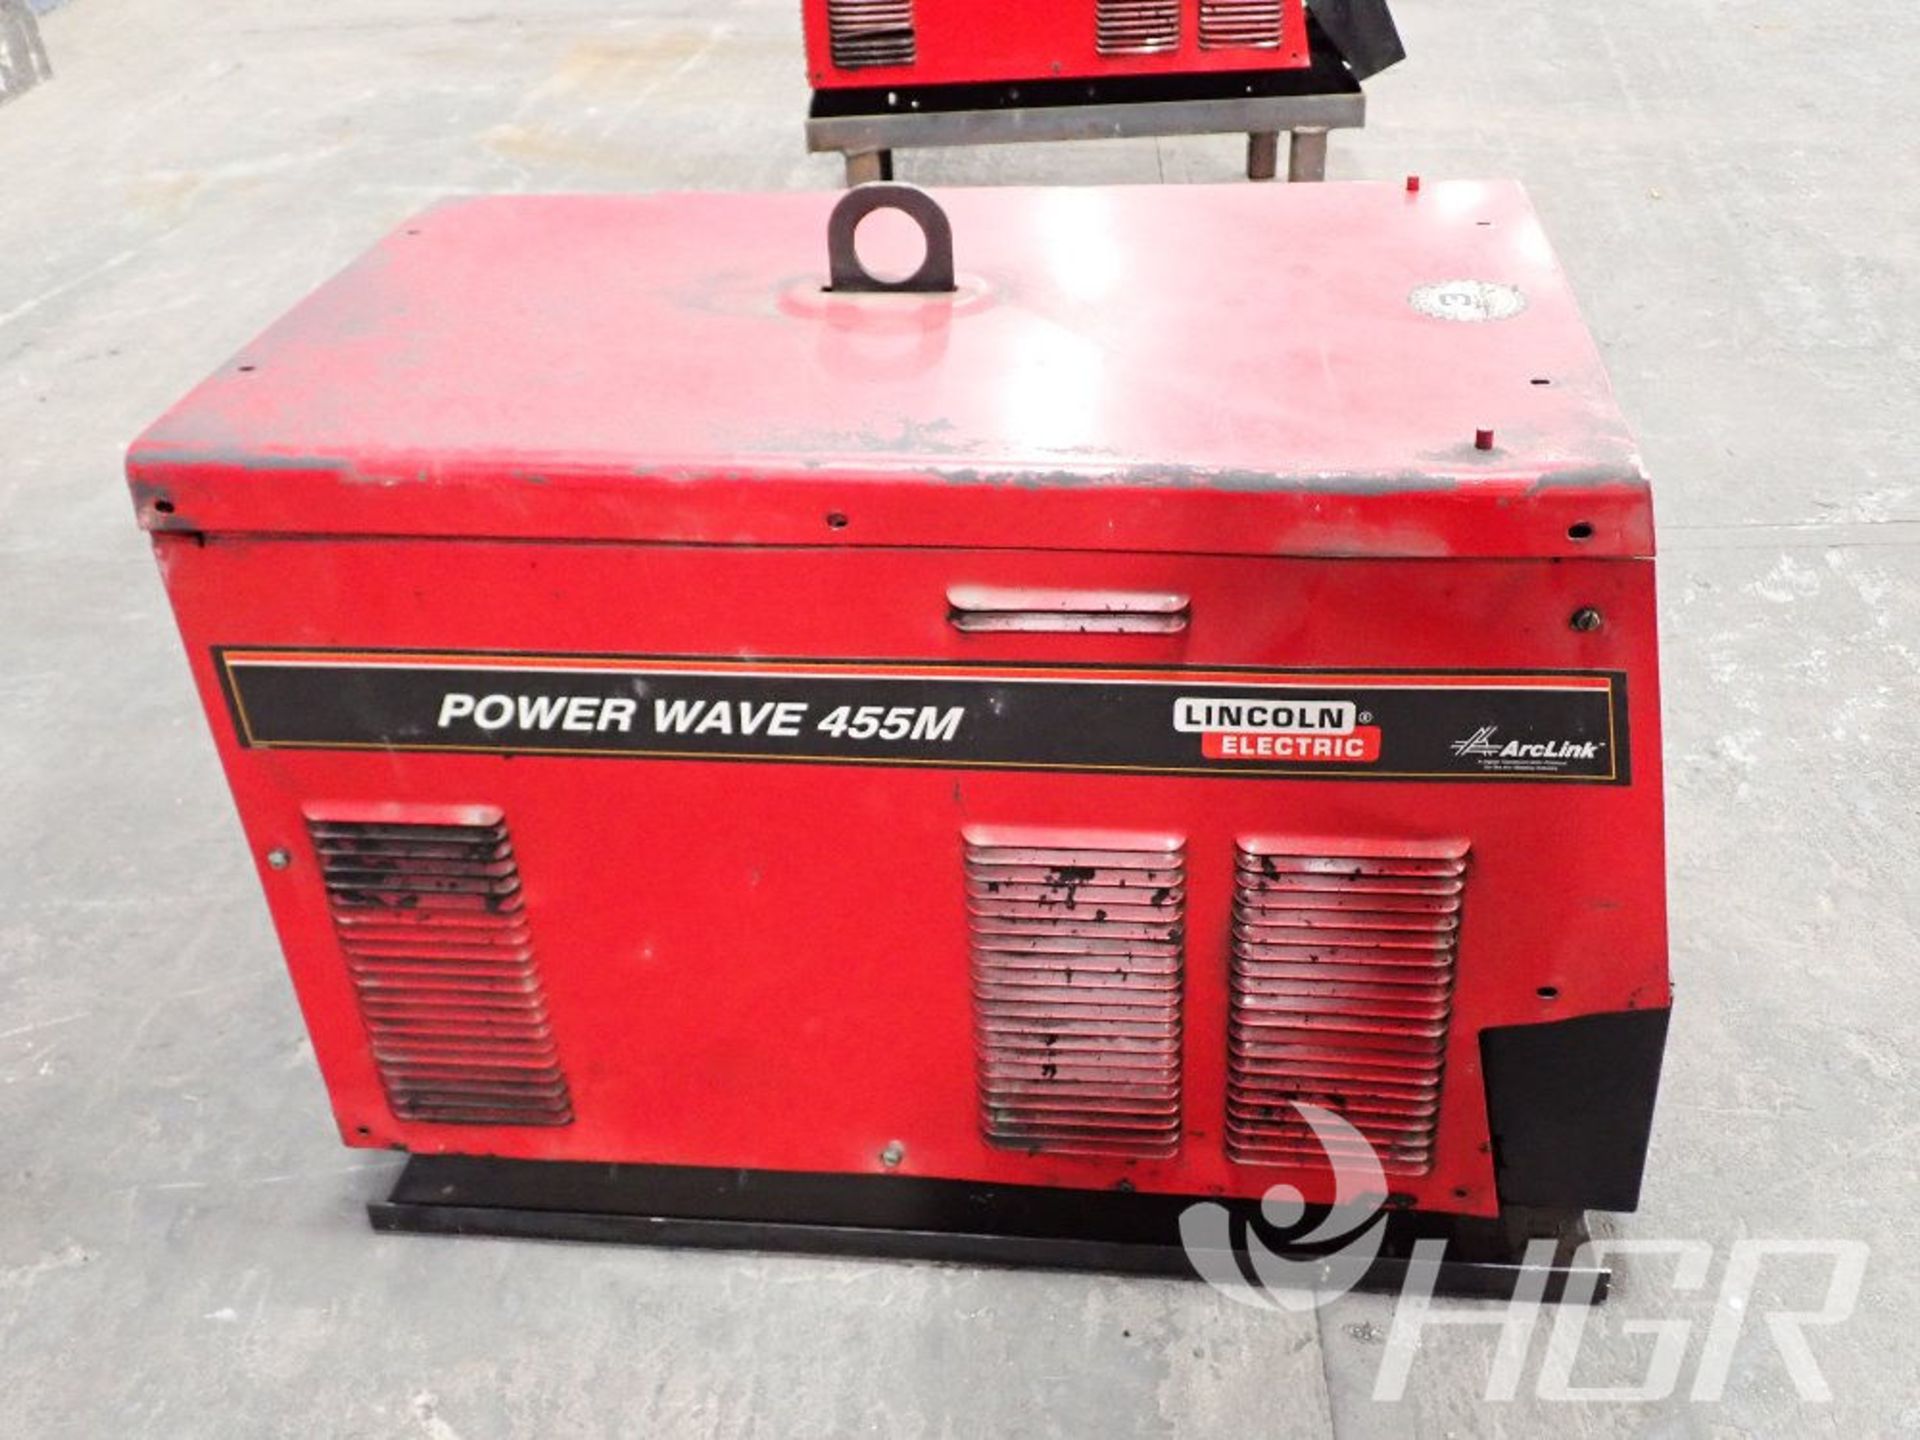 LINCOLN ELECTRIC WELDER, Model POWER WAVE 455M, Date: n/a; s/n SPLC4230441050709092, Approx. - Image 5 of 8